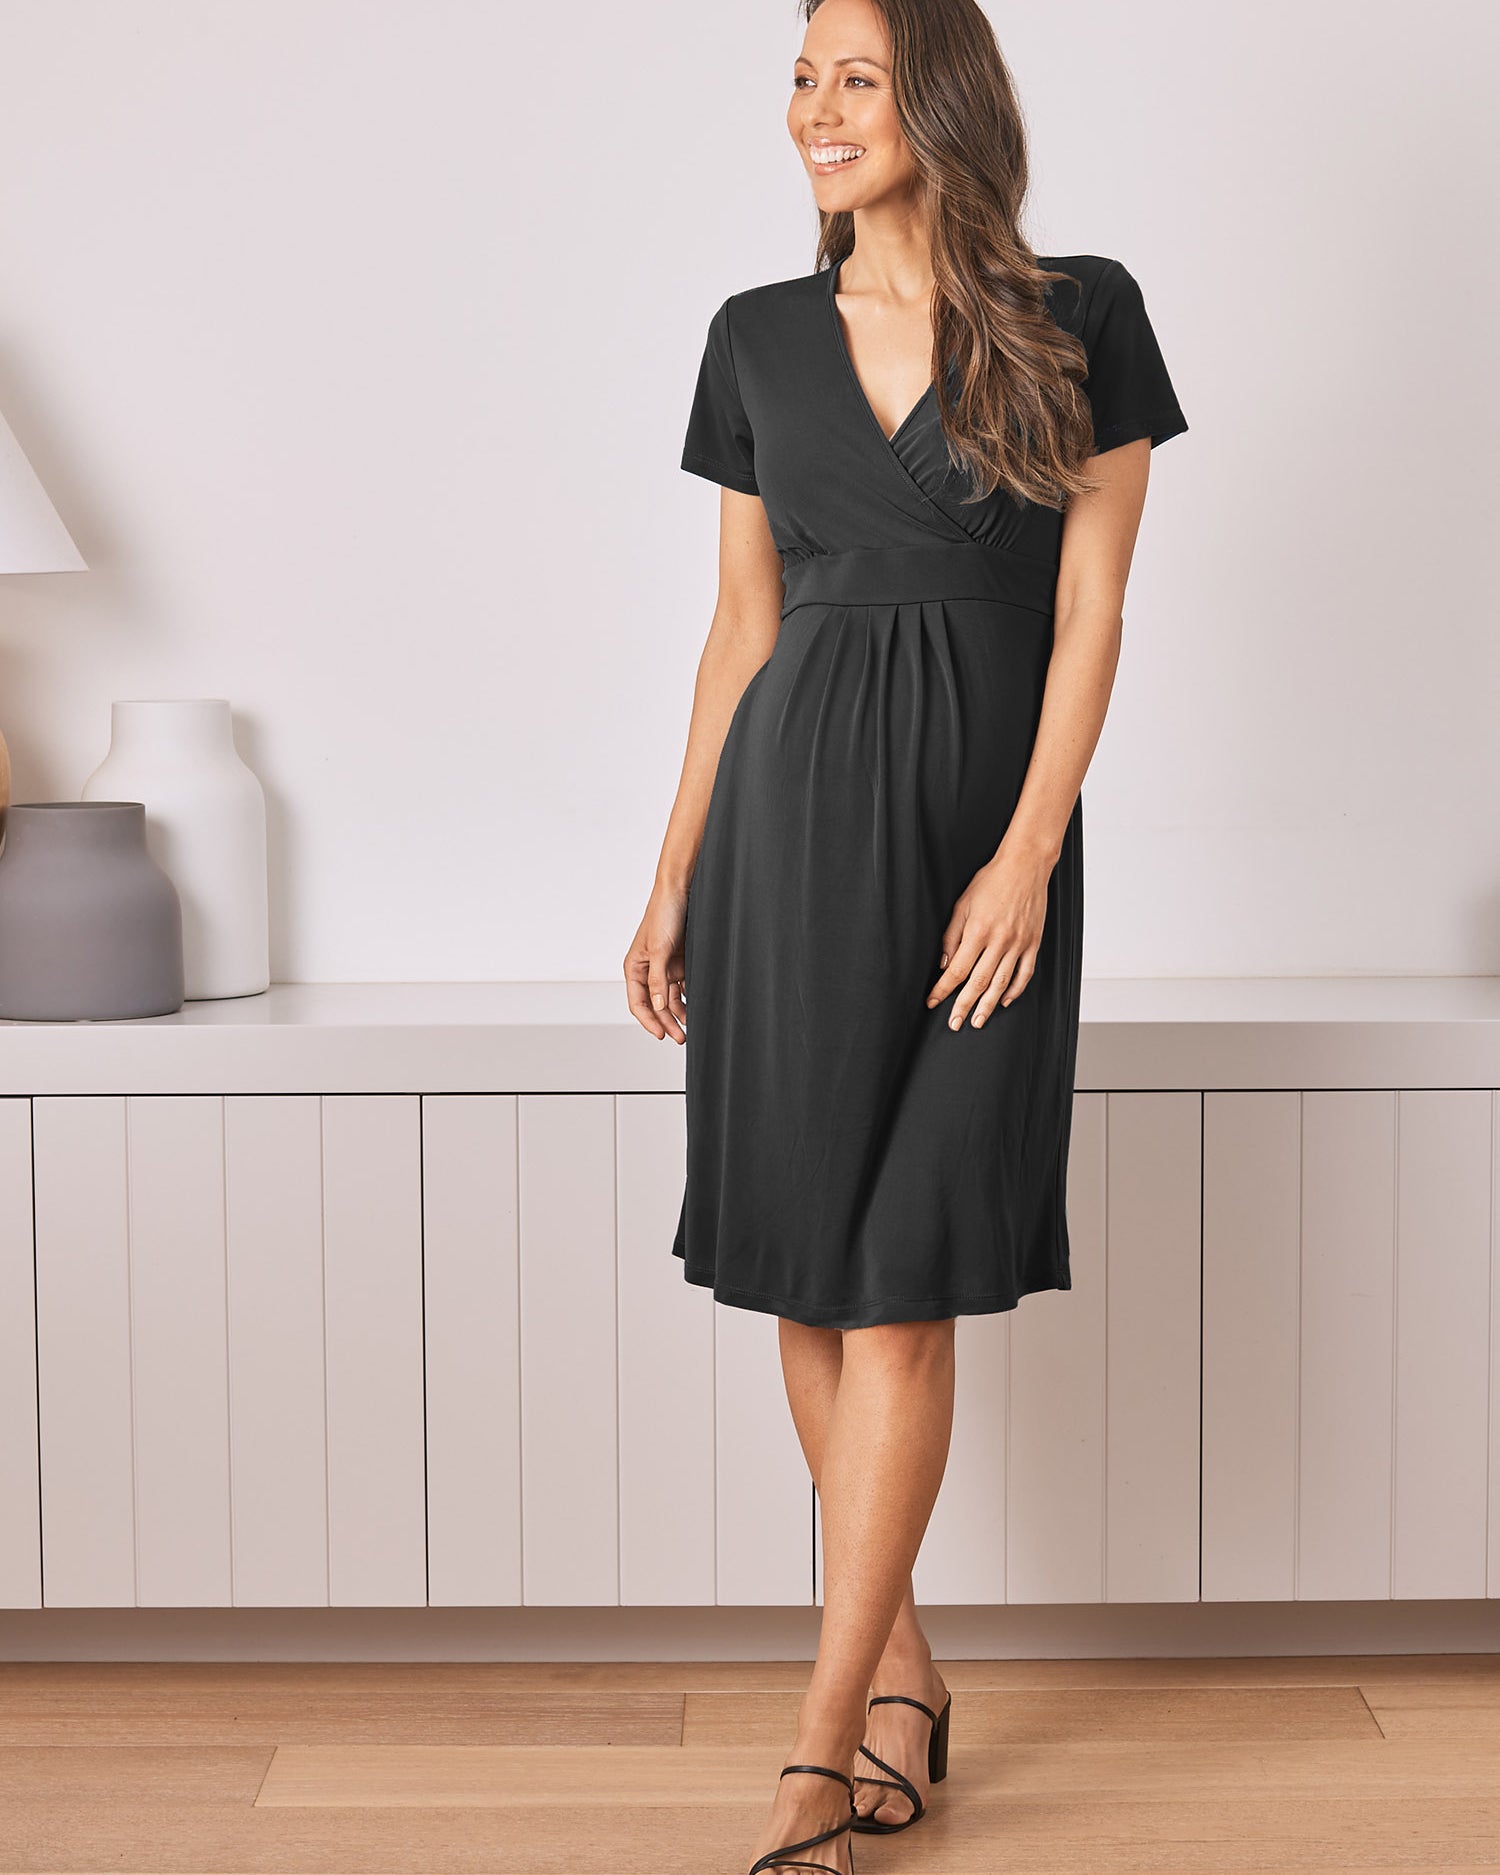 Main View - Maternity Crossover Neckline Tie Back Jersey Work Dress in Black from Angel Maternity